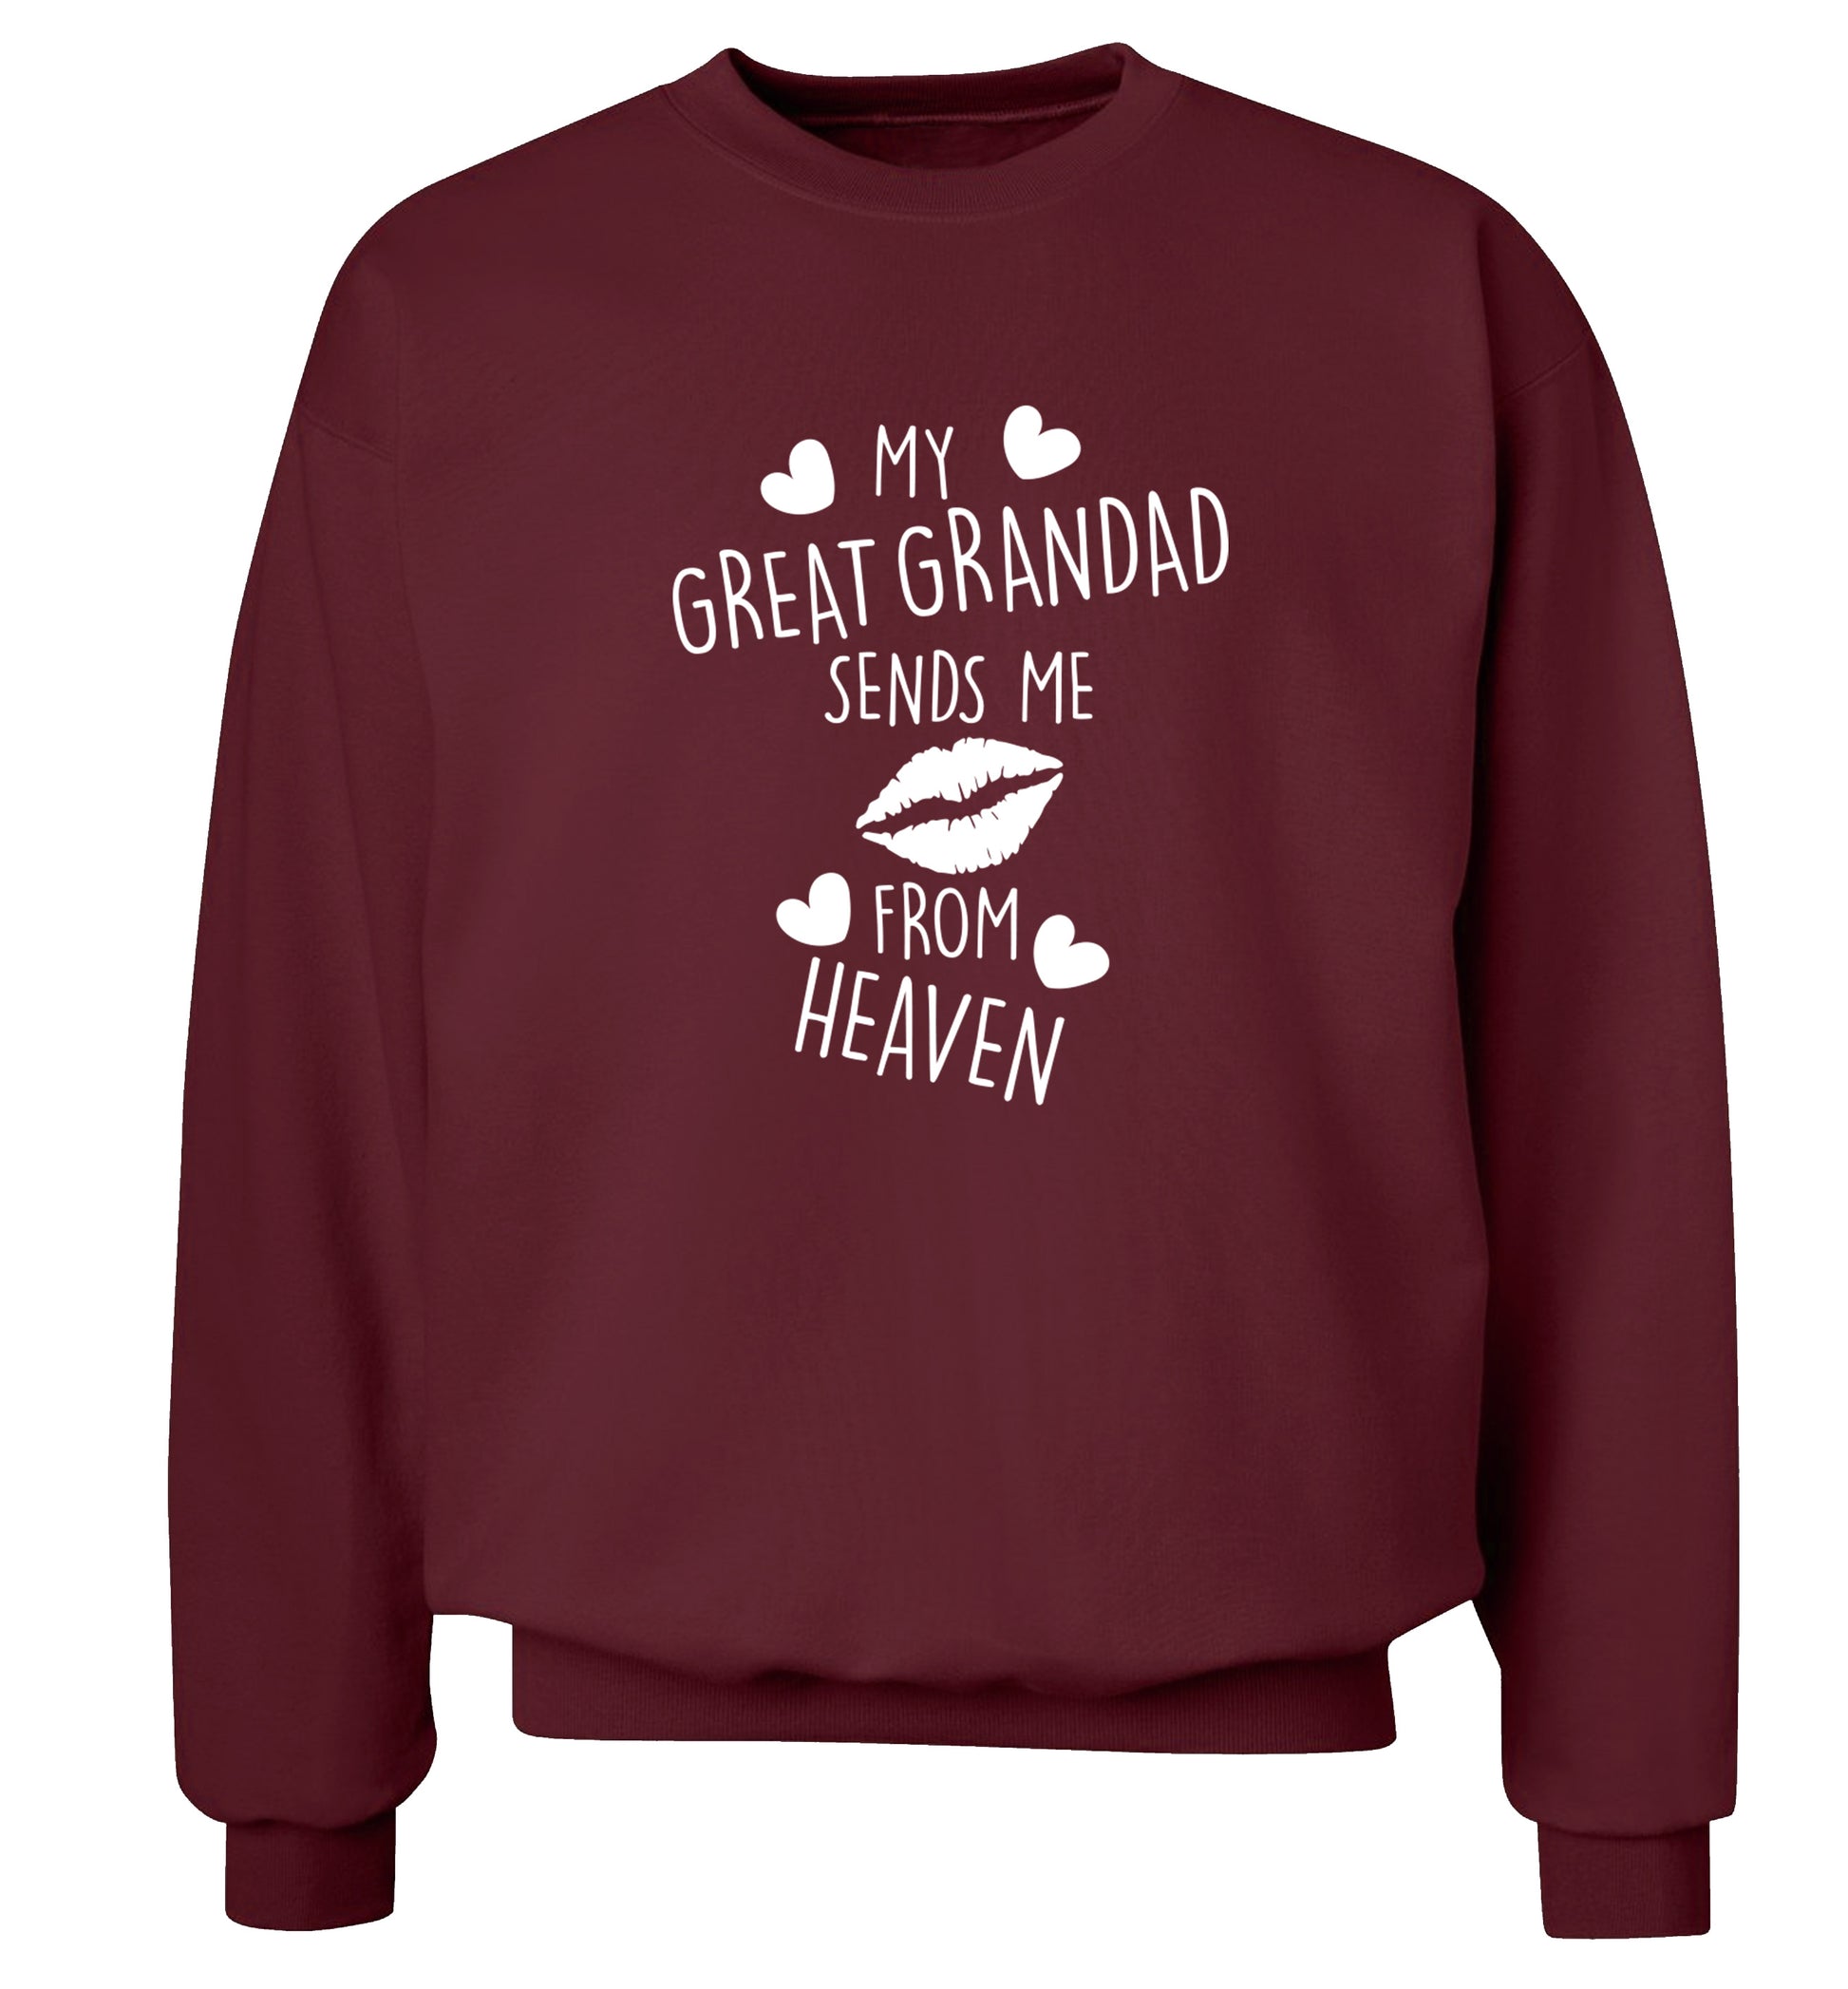 My great grandad sends me kisses from heaven Adult's unisex maroon Sweater 2XL